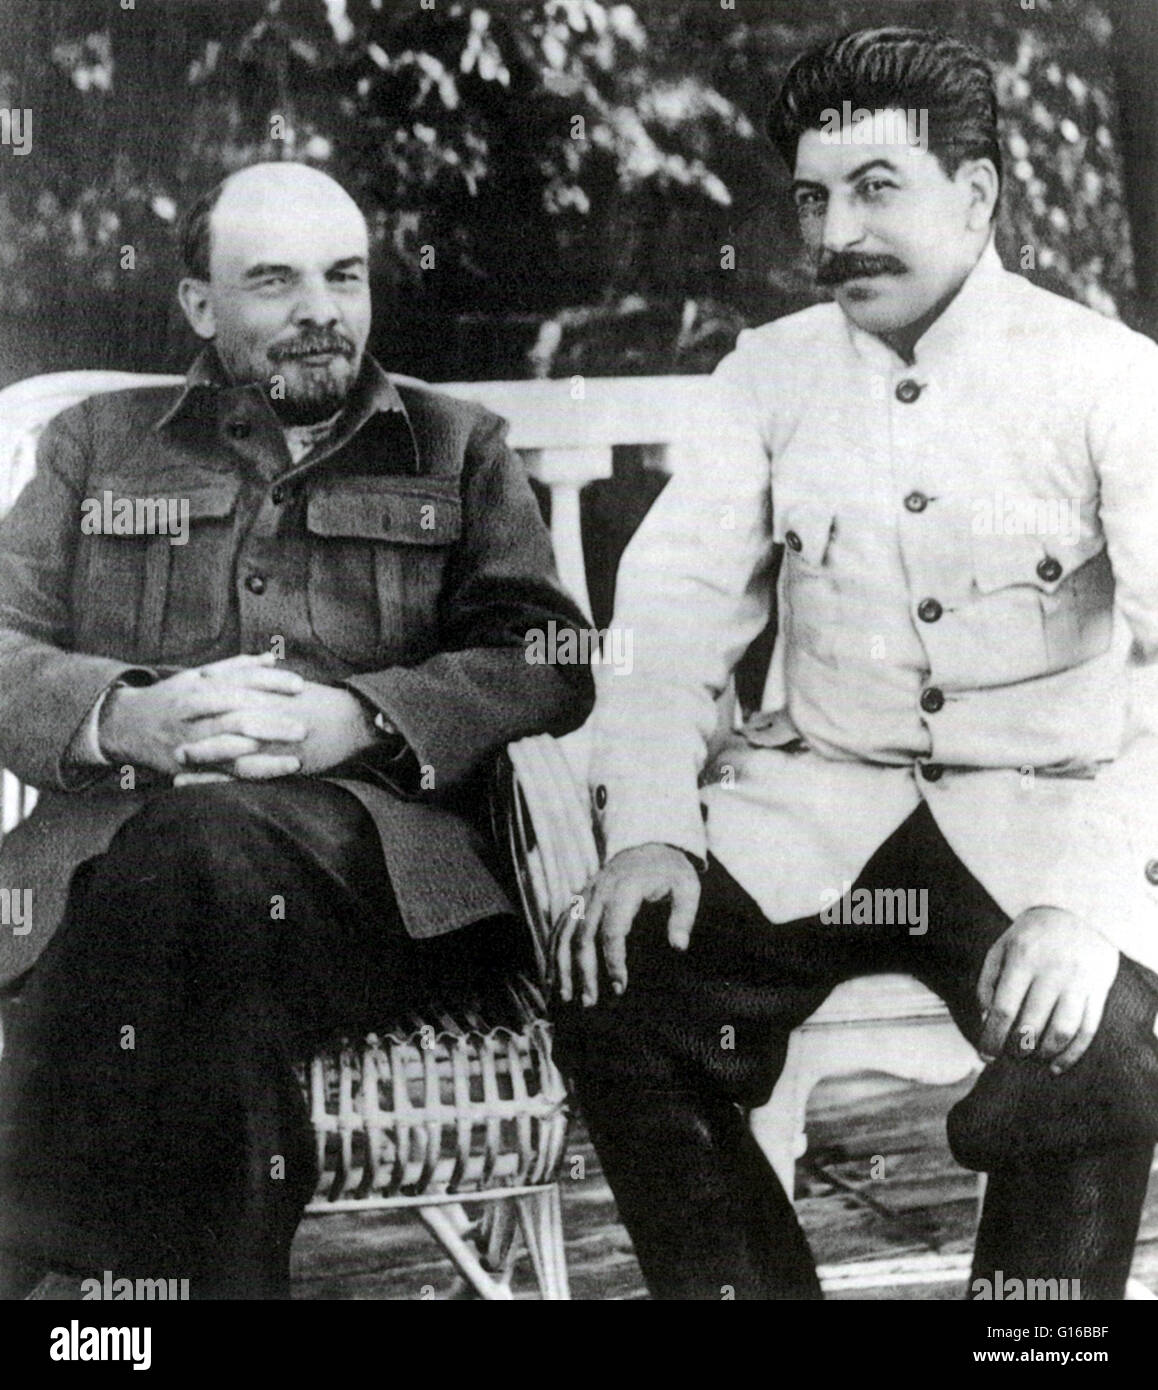 Vladimir Lenin (left) and Josef Stalin (right) in Gorki, 1922. Lenin suffered a stroke in 1922, forcing him into semi-retirement in Gorki. Stalin visited him often, acting as his intermediary with the outside world,but the pair quarreled and their relatio Stock Photo